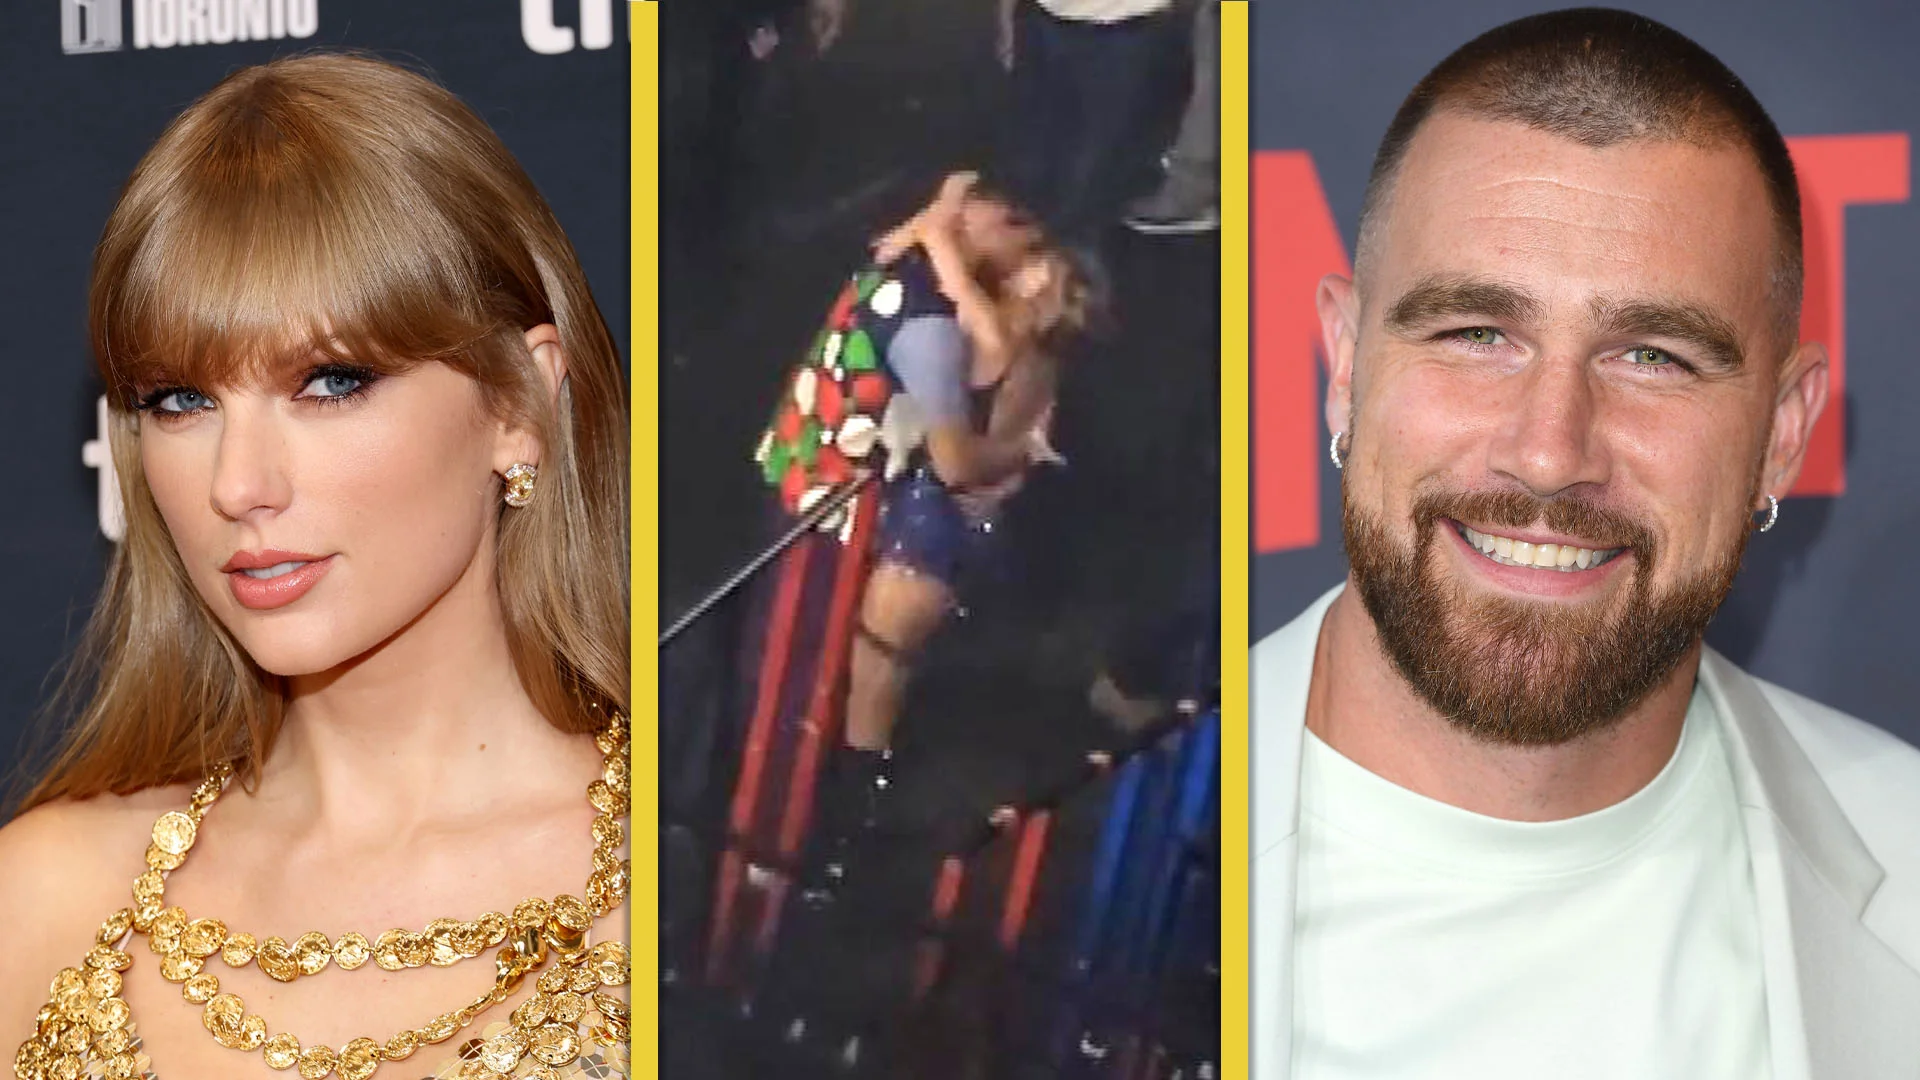 NFL Fans React as Travis Kelce Mistakenly Touches Taylor Swift's Butt at Eras Tour Argentina – Photos Spark Social Media Frenzy